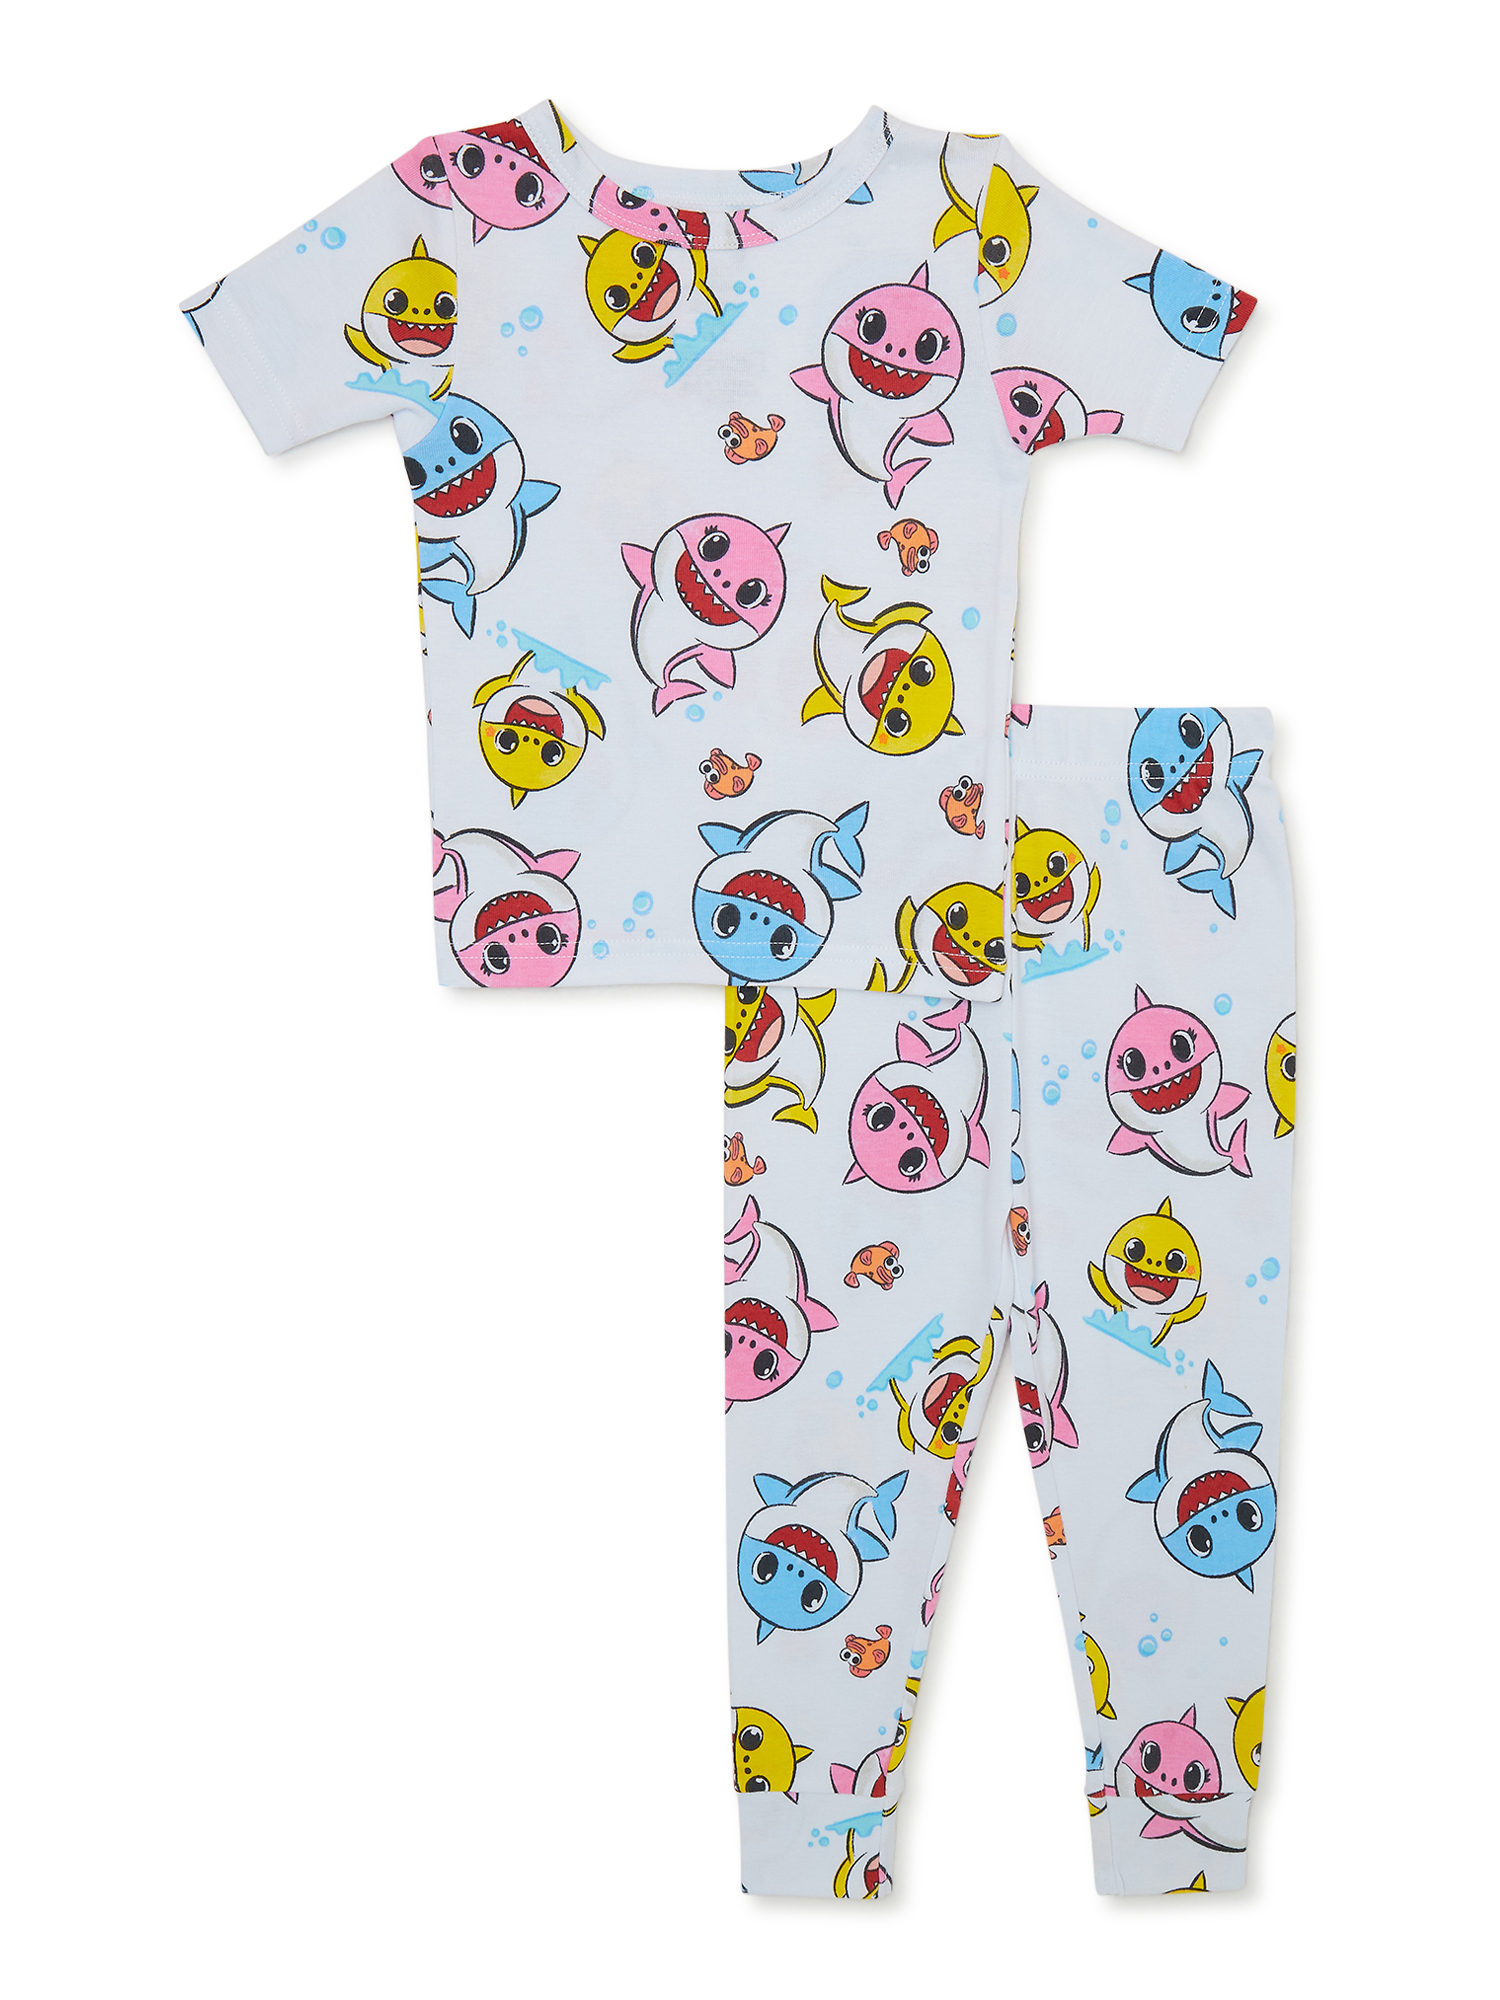 Character Toddler Snug-Fit Pajama Set, 2 Piece, Sizes 12M-5T - image 1 of 4